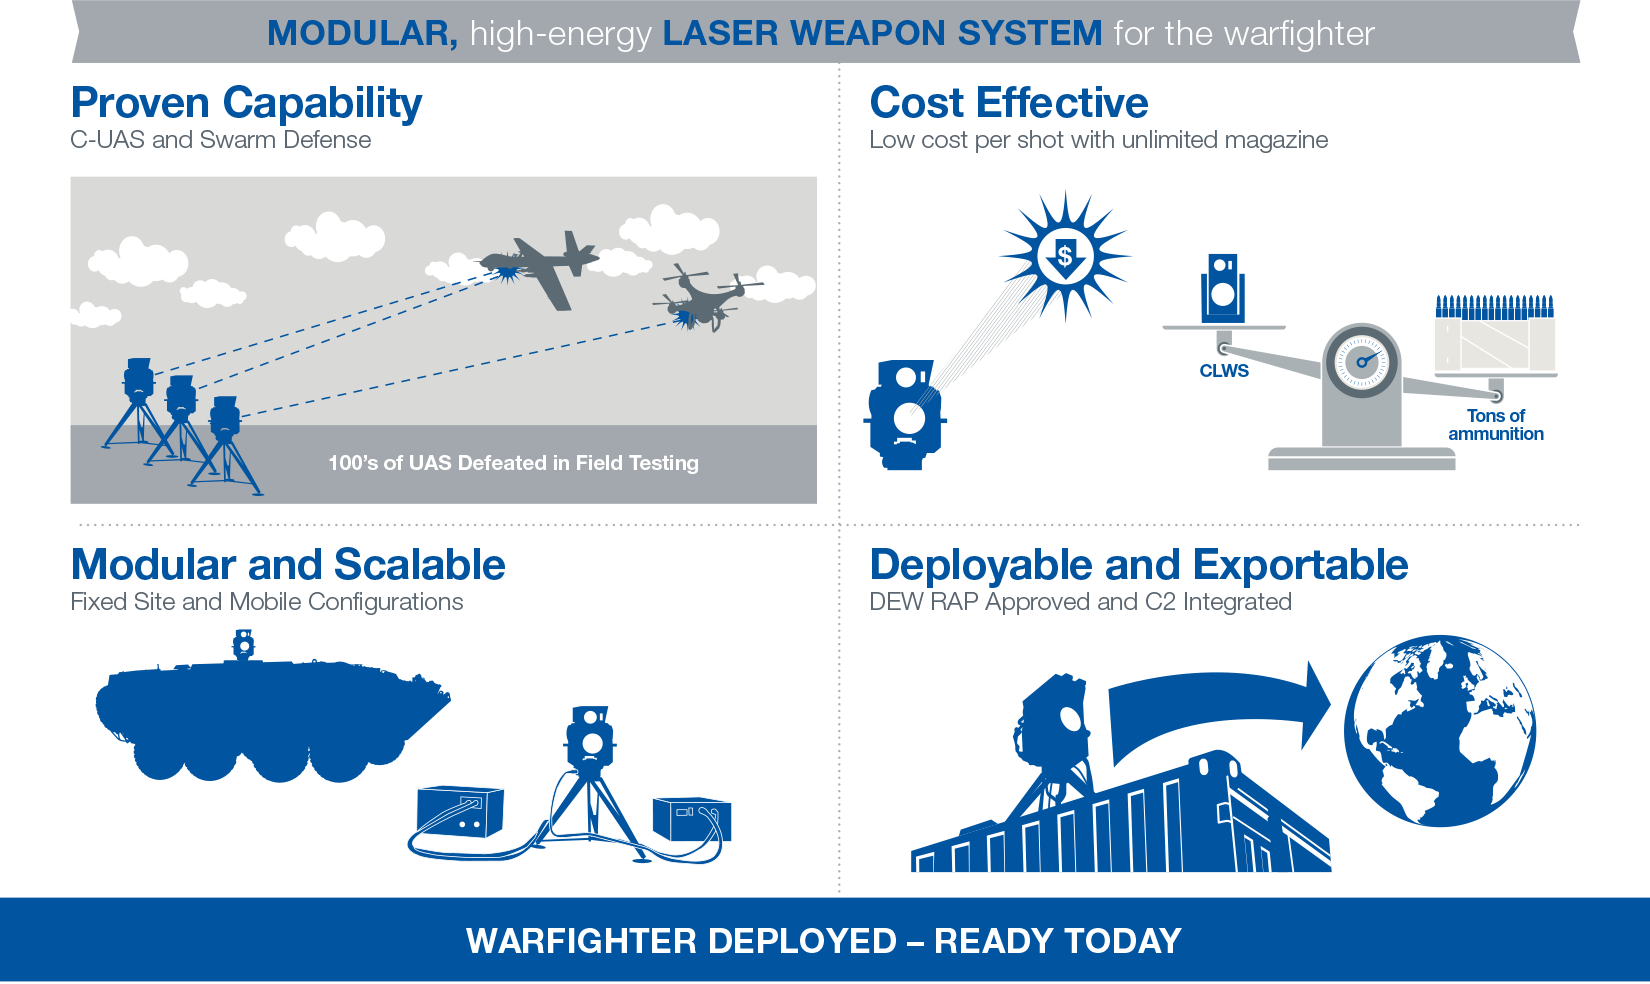 Boeing Compact Laser Weapon System (CLWS) 